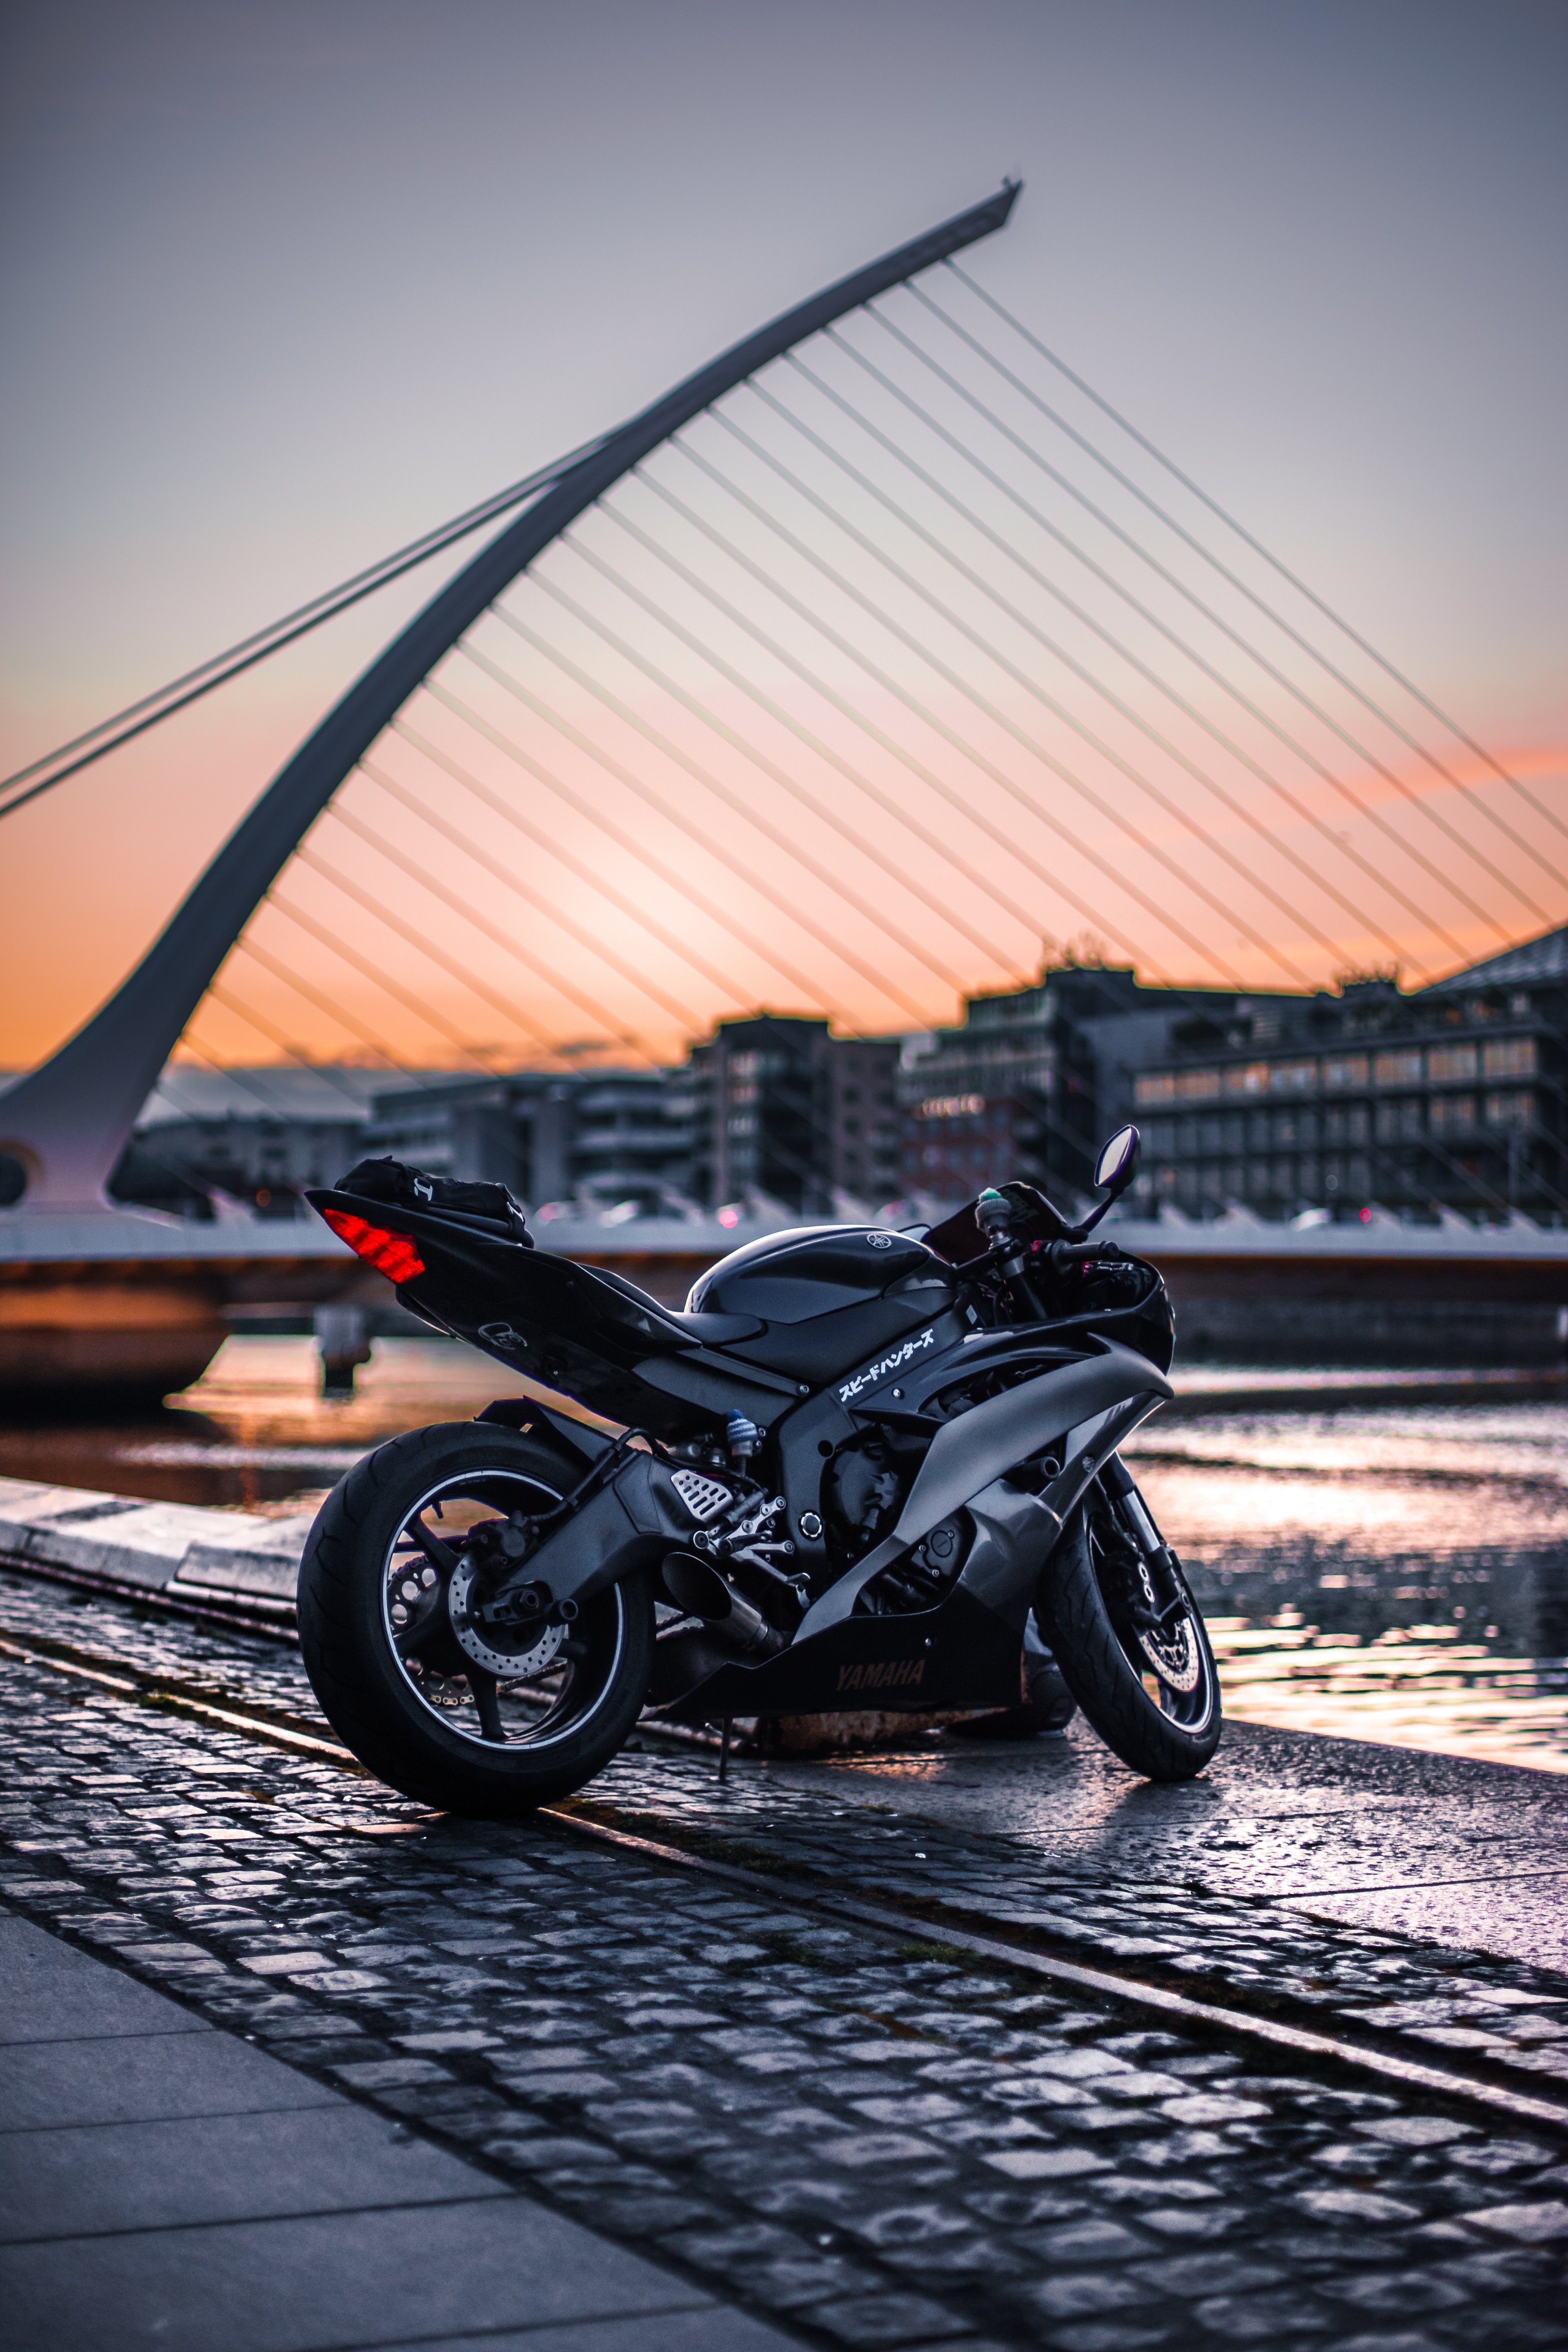 bike, city, smooth, side view, motorcycles, blur, motorcycle